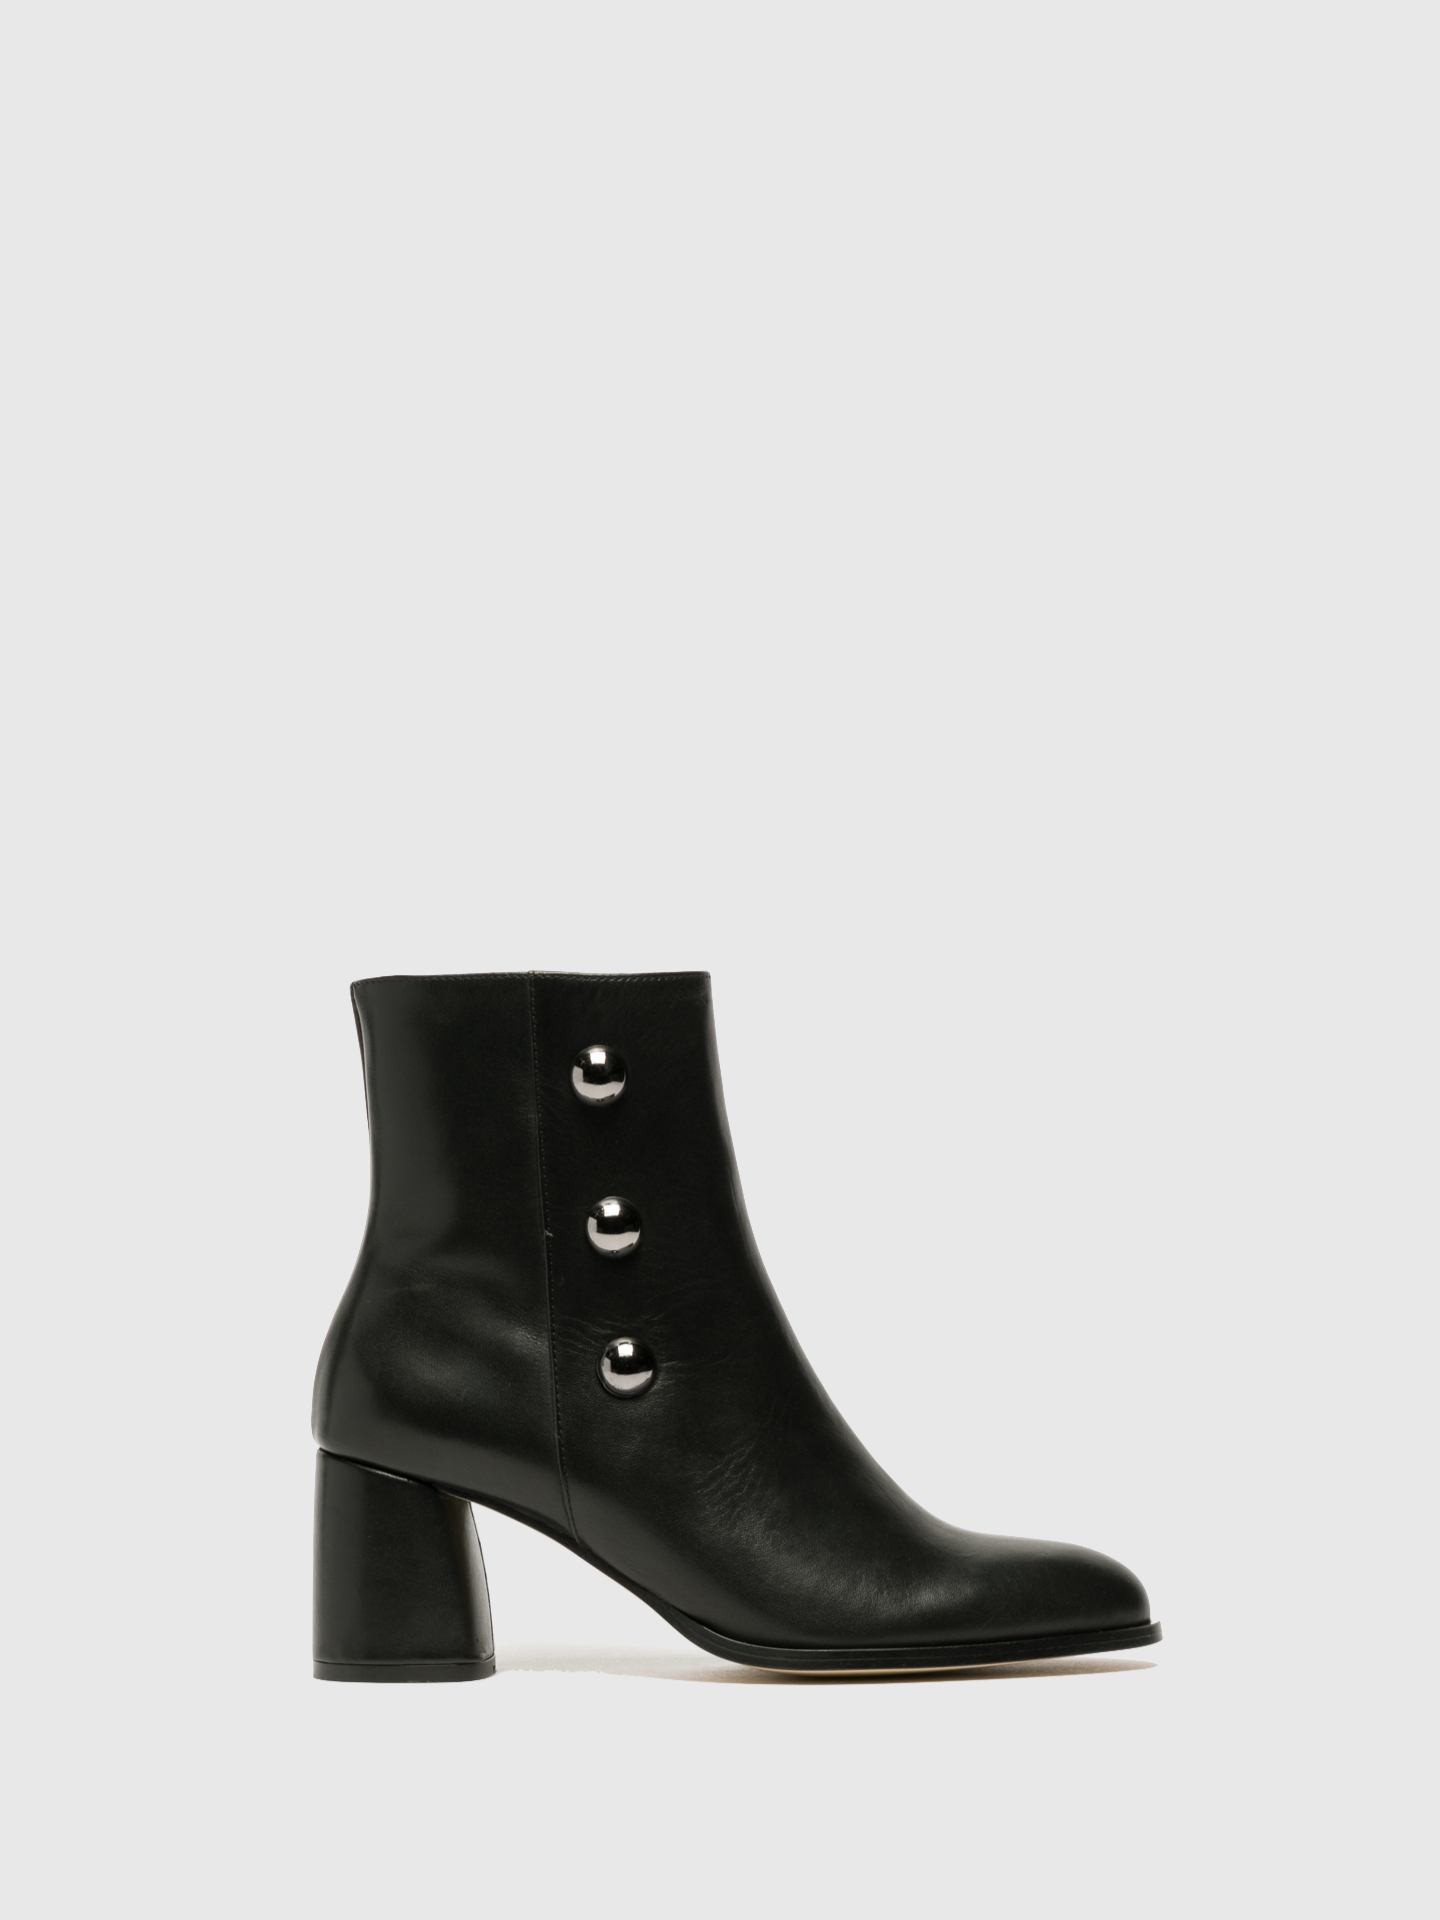 Sofia Costa Black Studded Ankle Boots